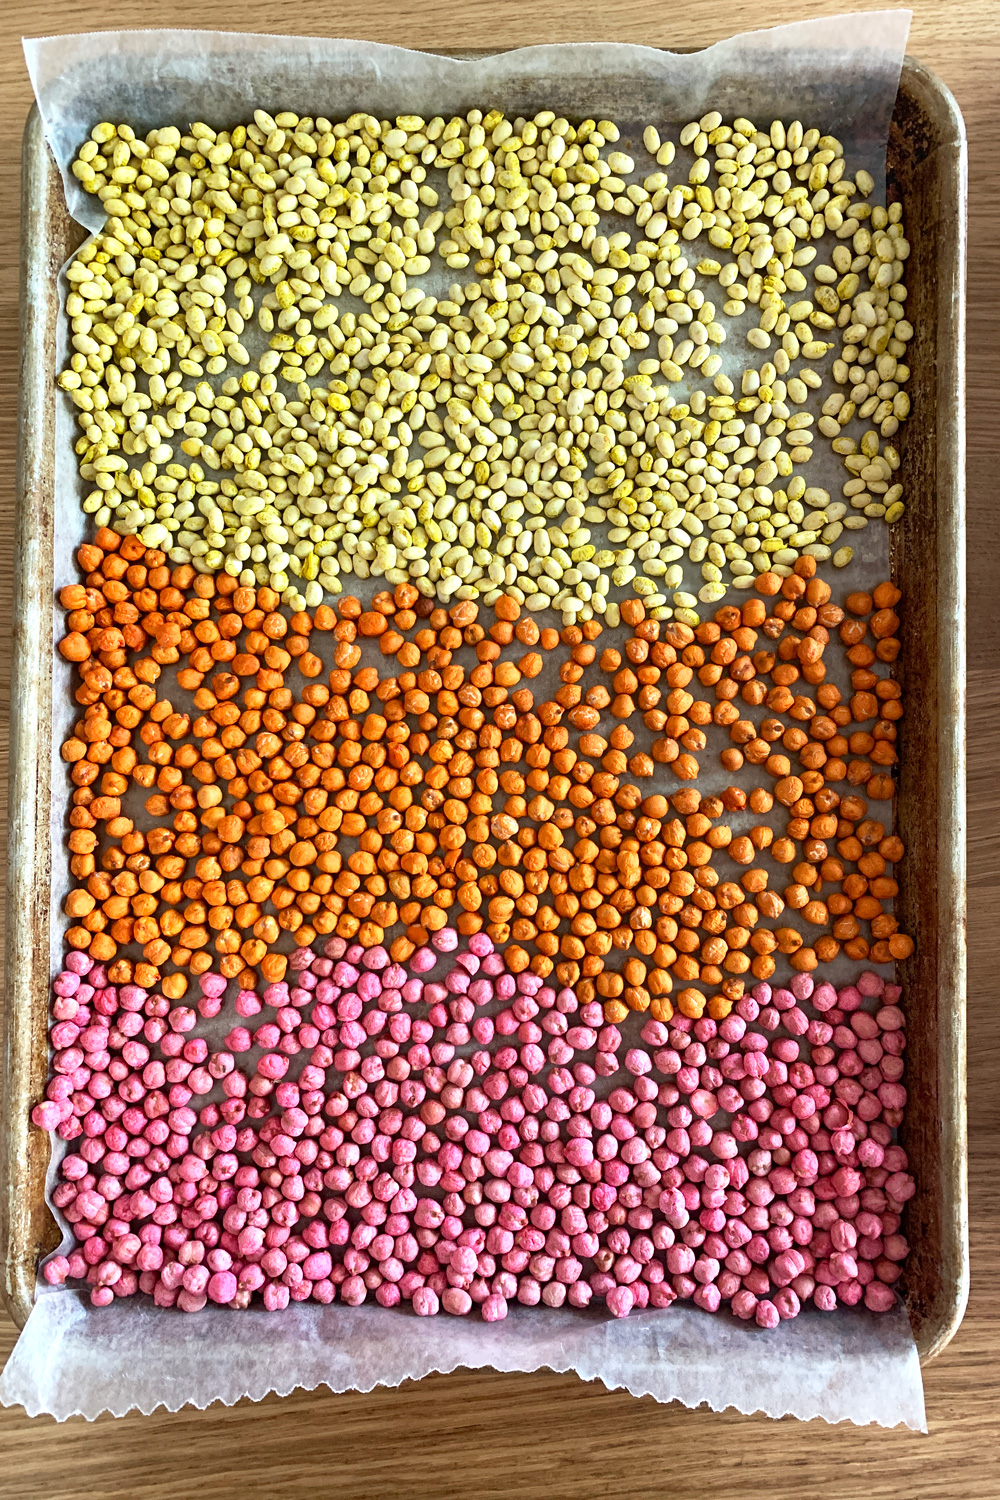 Baking sheet with yellow, orange, and pink beans.